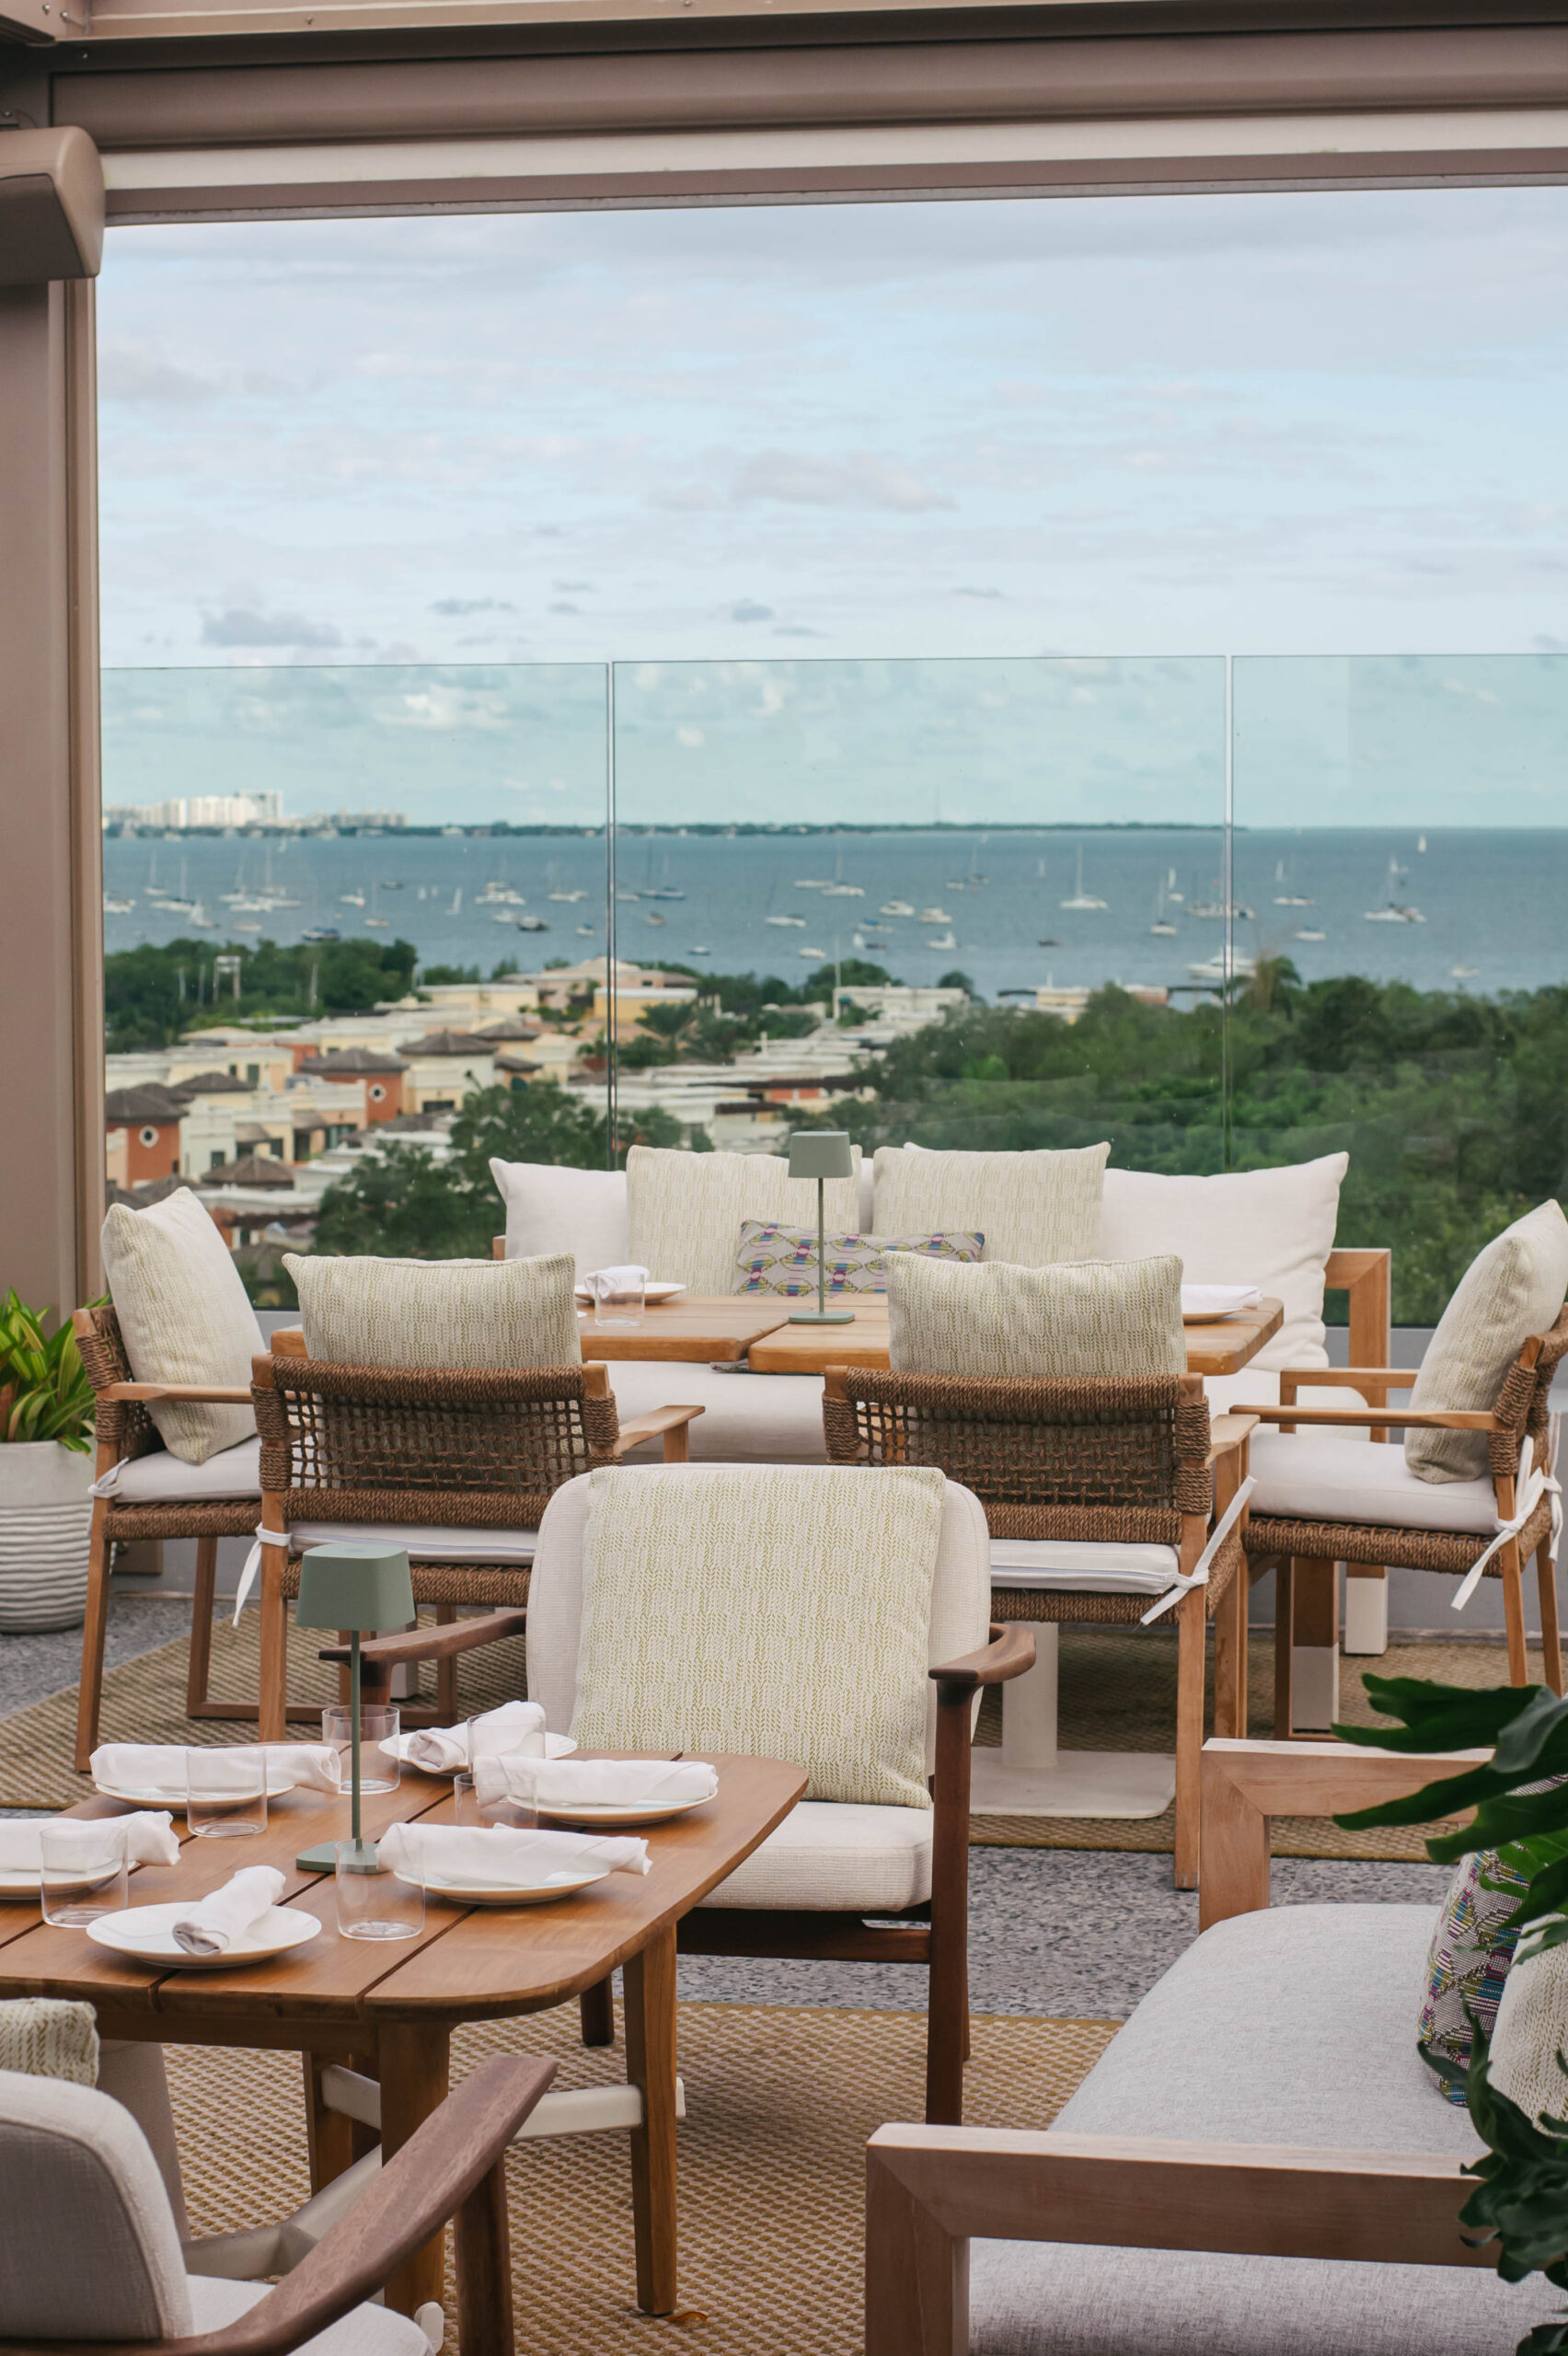 Level 6 By Amal Review - Coconut Grove - Miami - The Infatuation